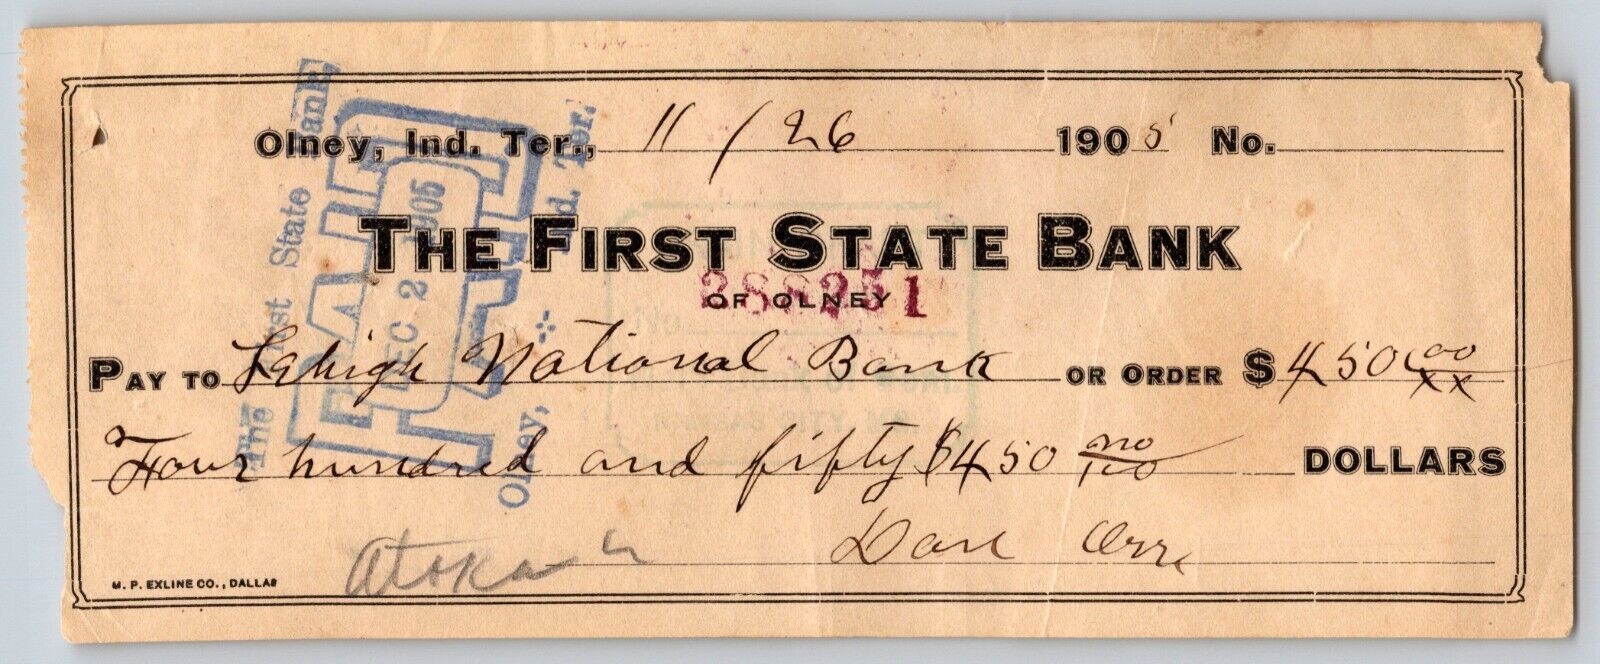 Olney, Okla. Indian Territory 1905 $450 First State Bank Check - Ghost Town